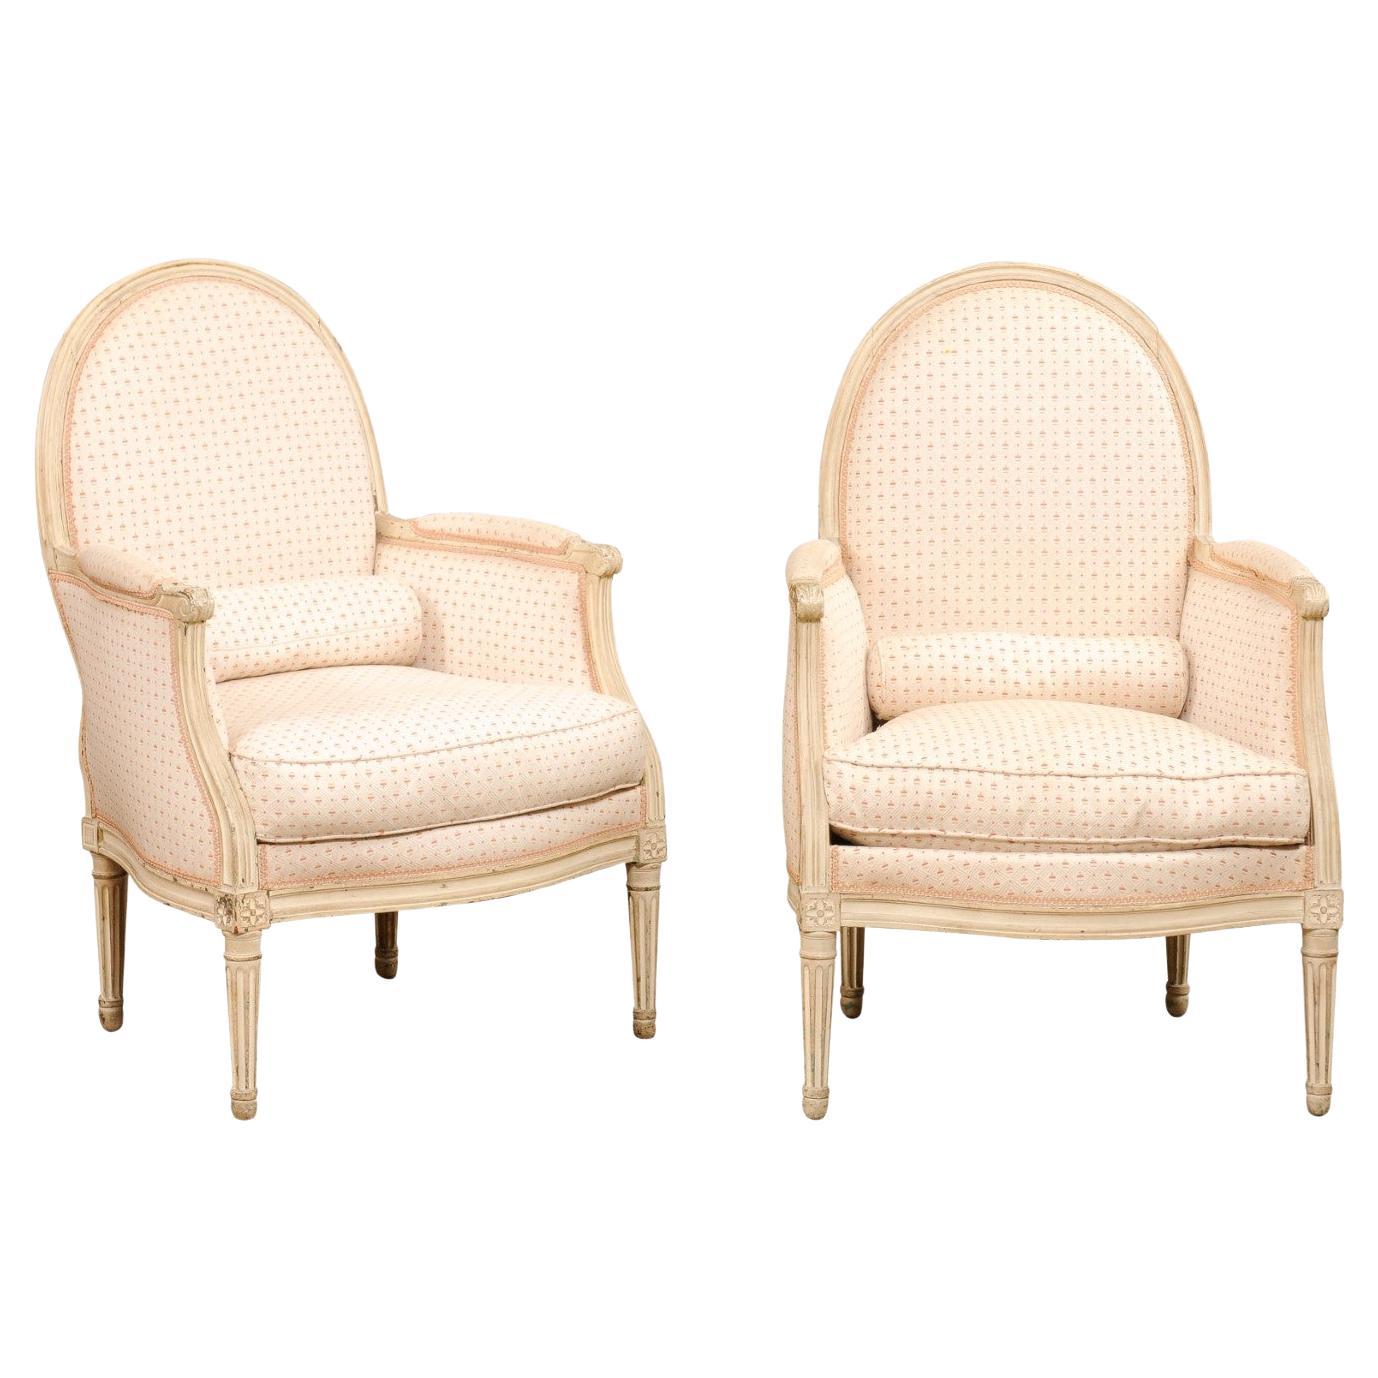 Pair of French Louis XVI Style Painted Bergères Chairs with Oval Shaped Backs